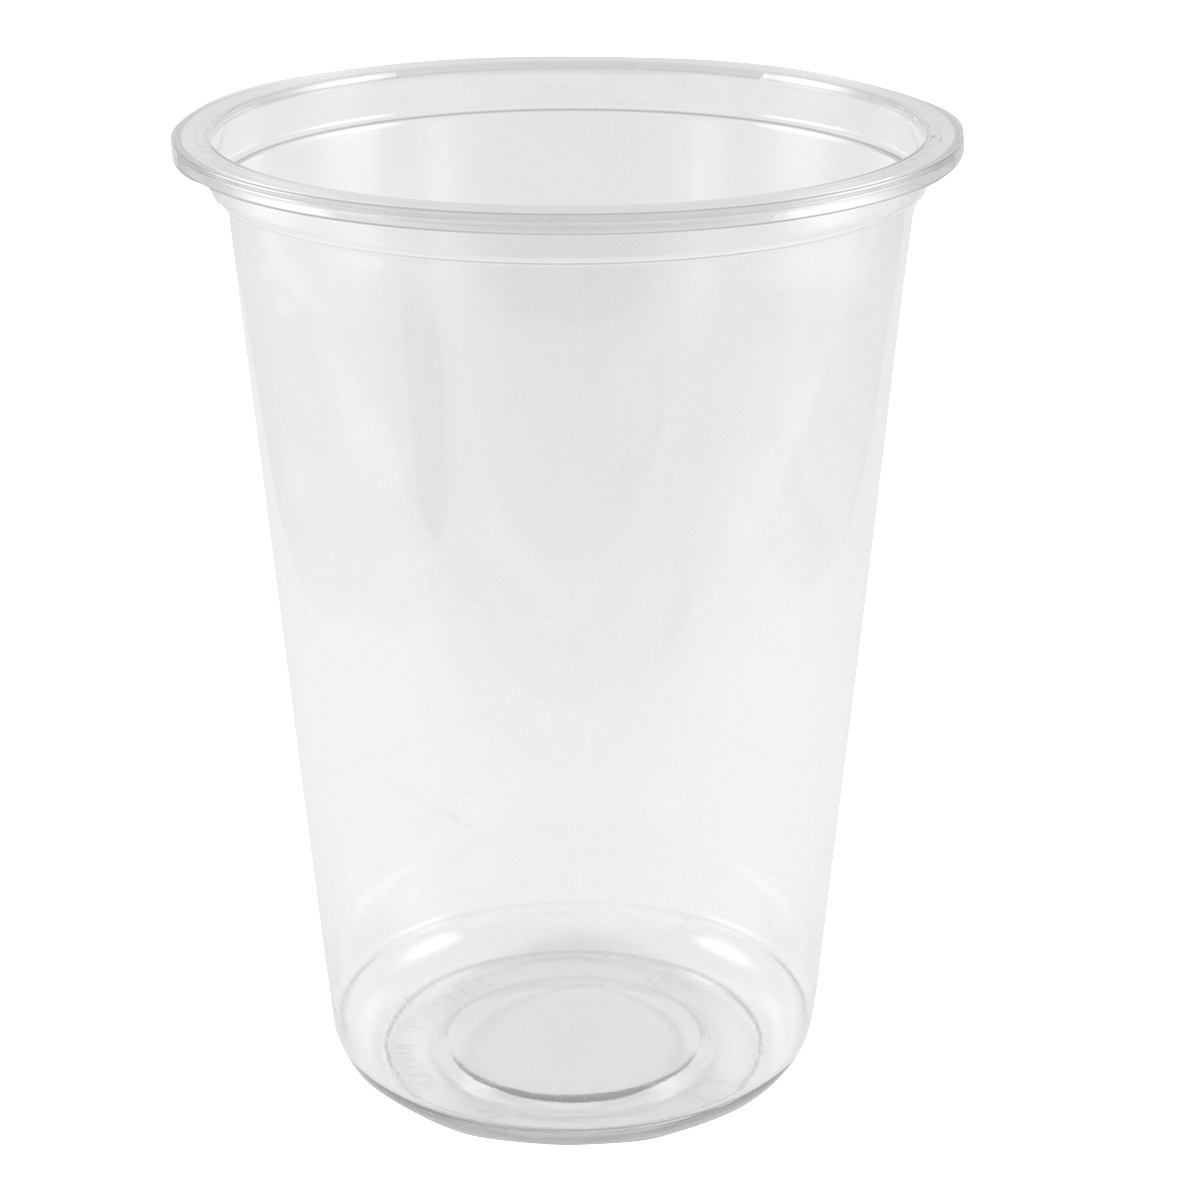 Tusipack Round Food Cup, 1000 ml